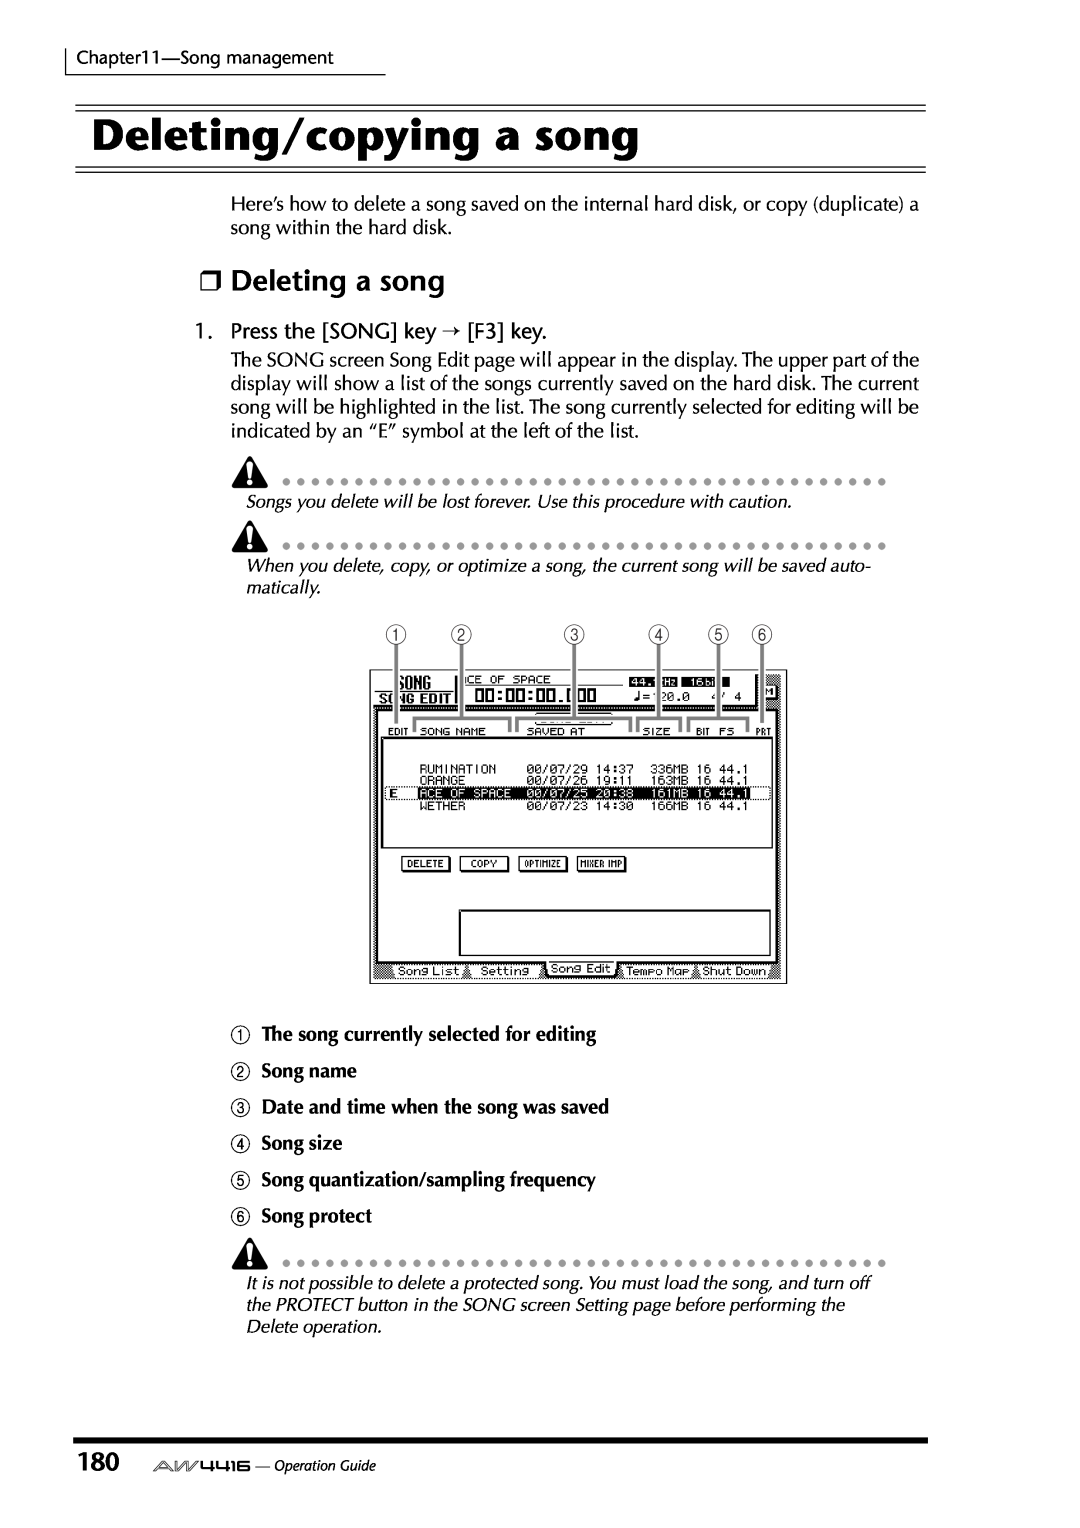 Yamaha AW4416 manual Deleting/copying a song, Deleting a song, 1The song currently selected for editing, FSong protect 